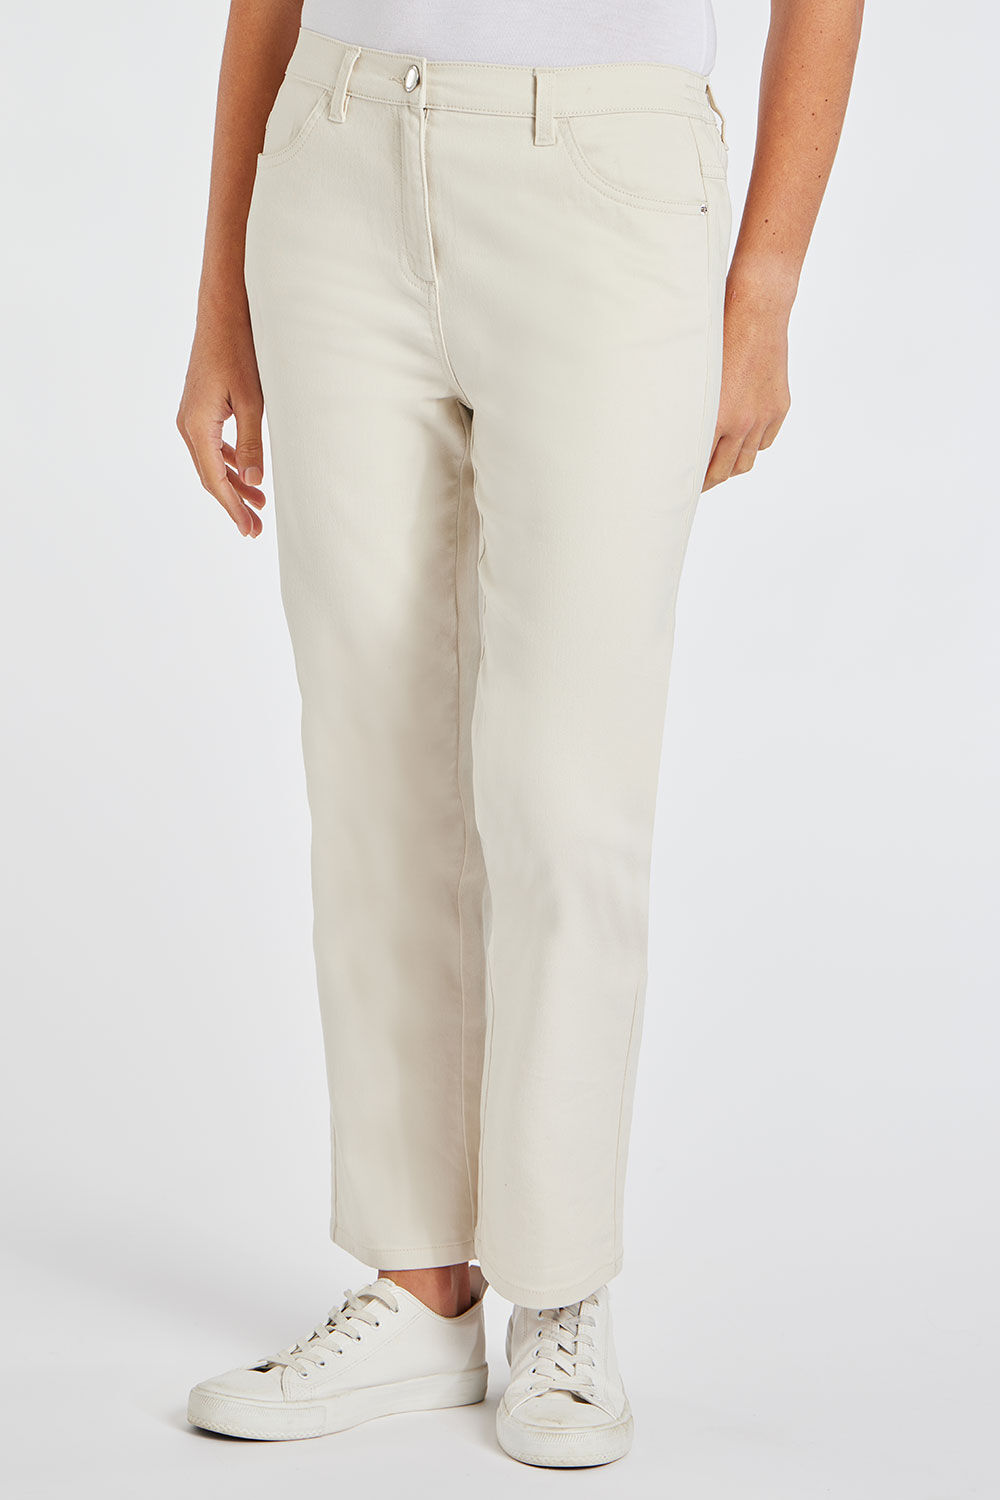 Bonmarche Ivory The Sara Coloured Straight Leg Jeans, Size: 26